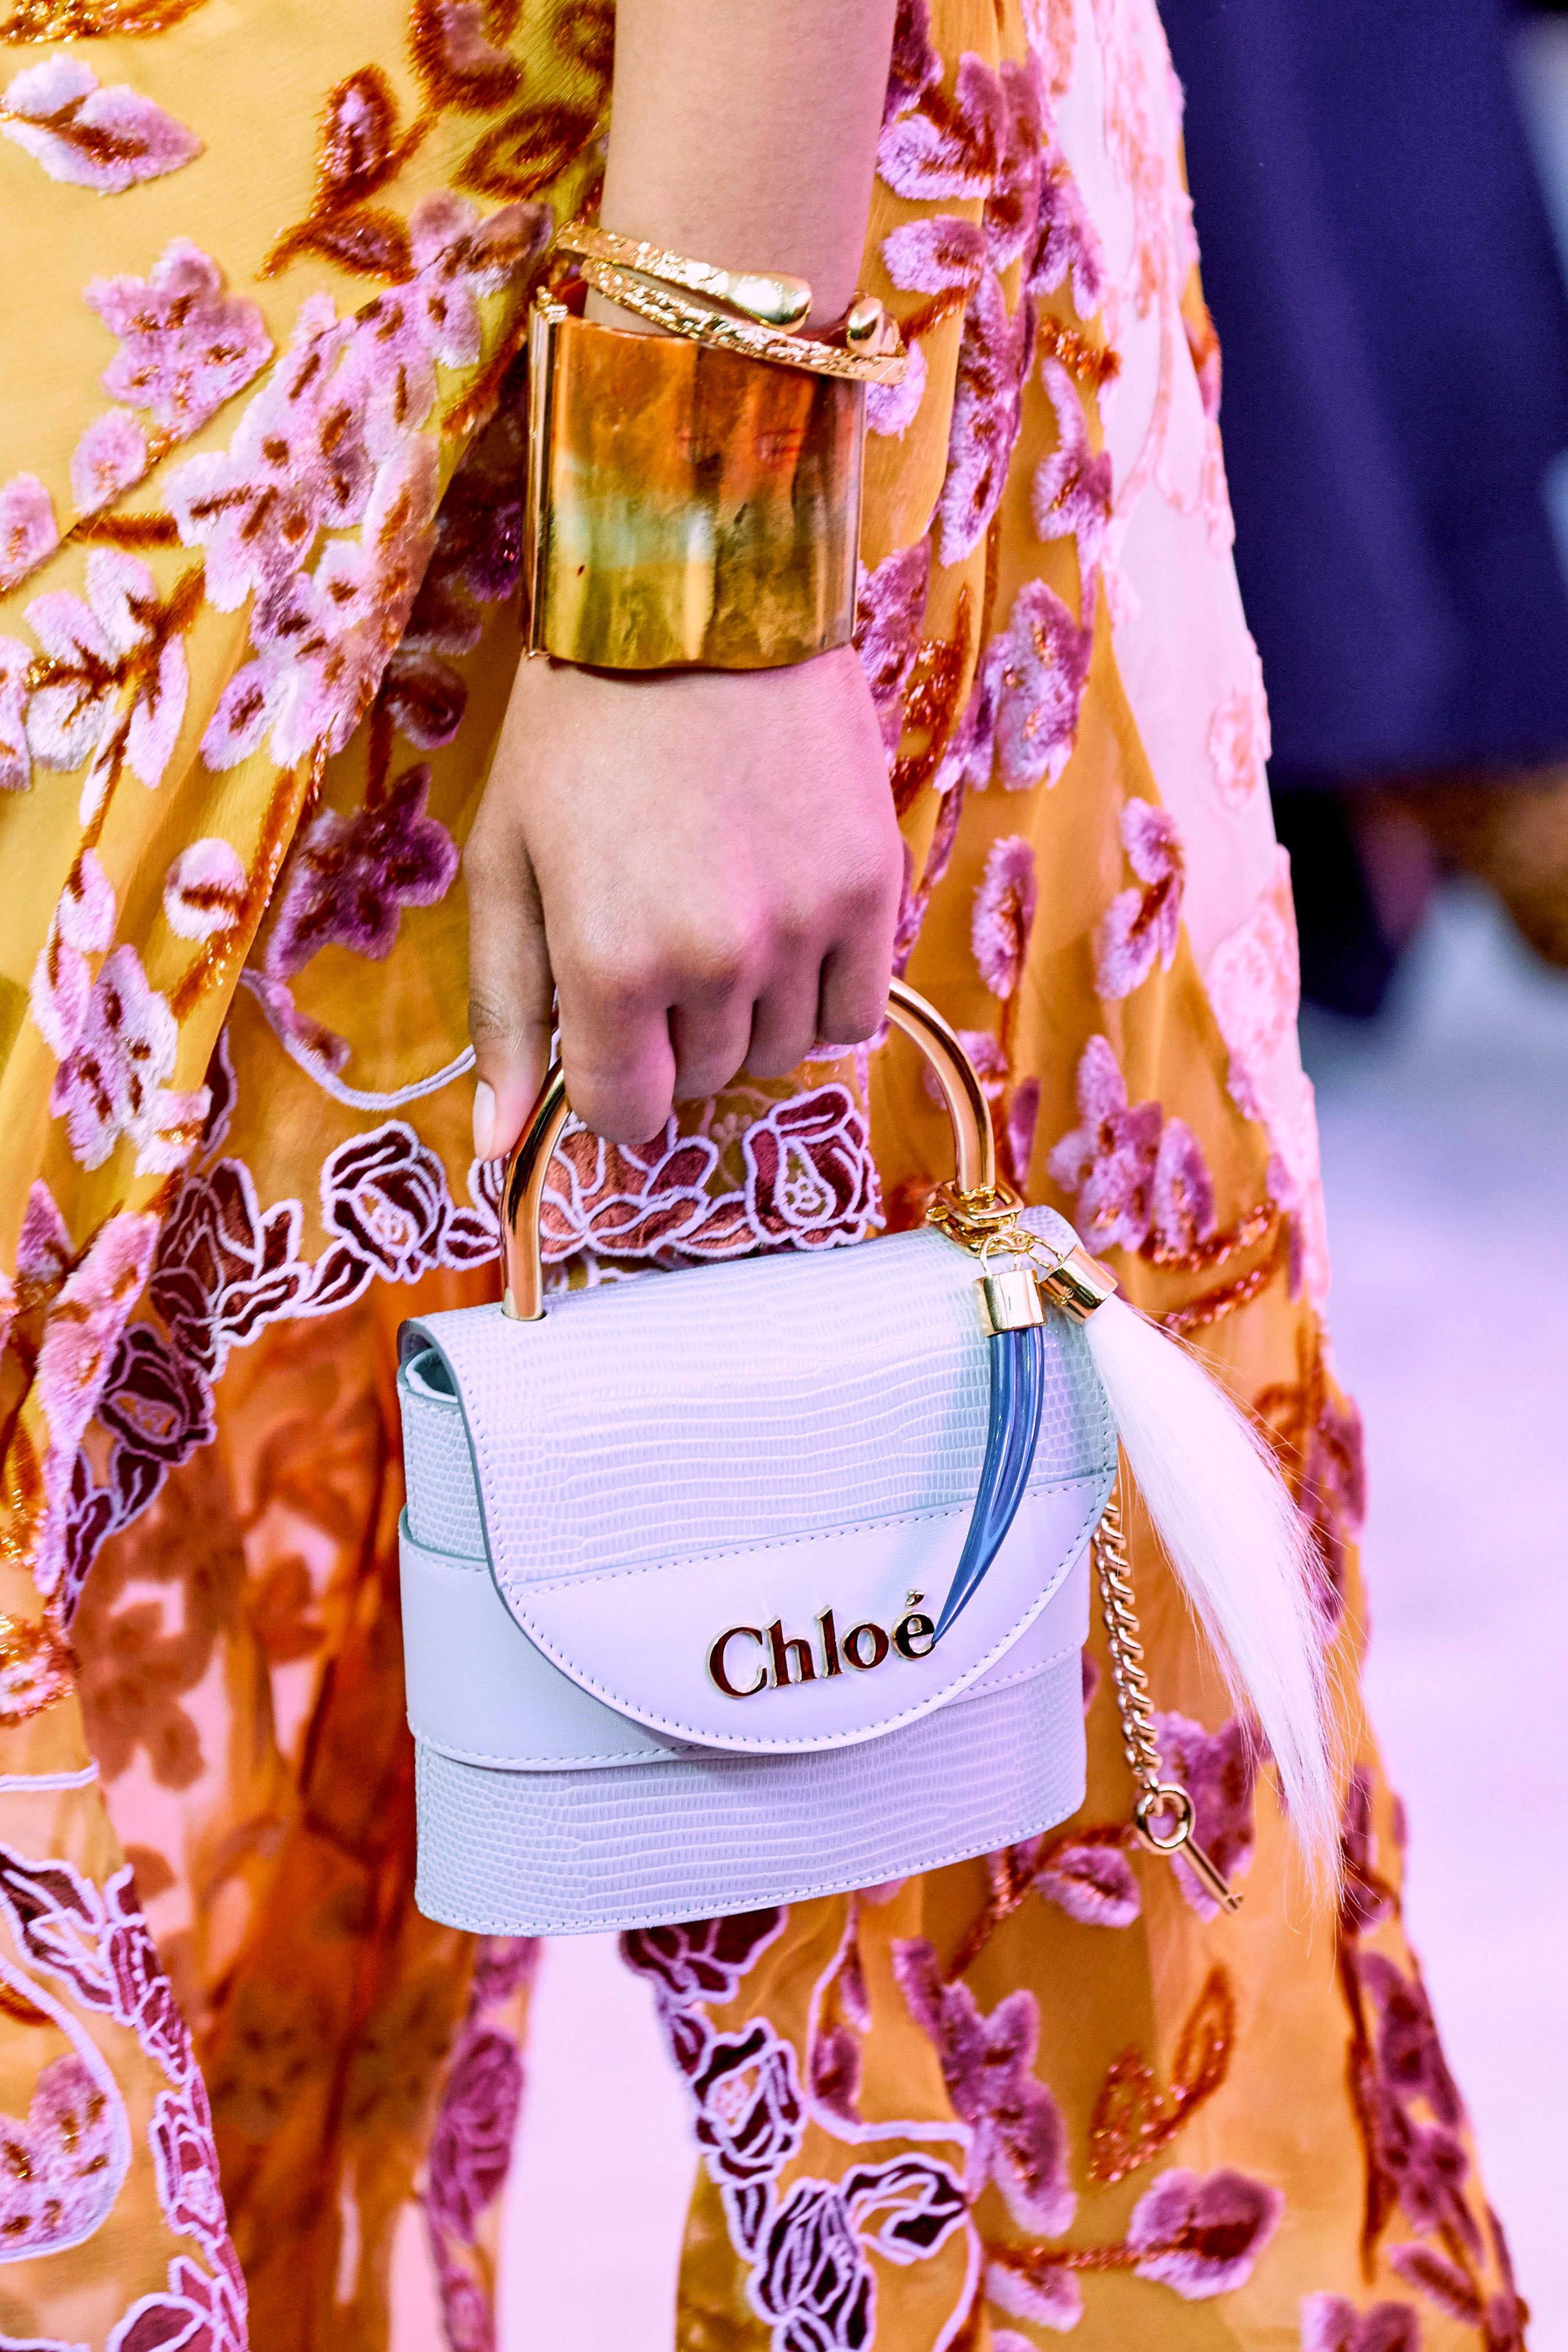 White mini top-handle bag from the Chloé Fall 2019 Runway Bag Collection